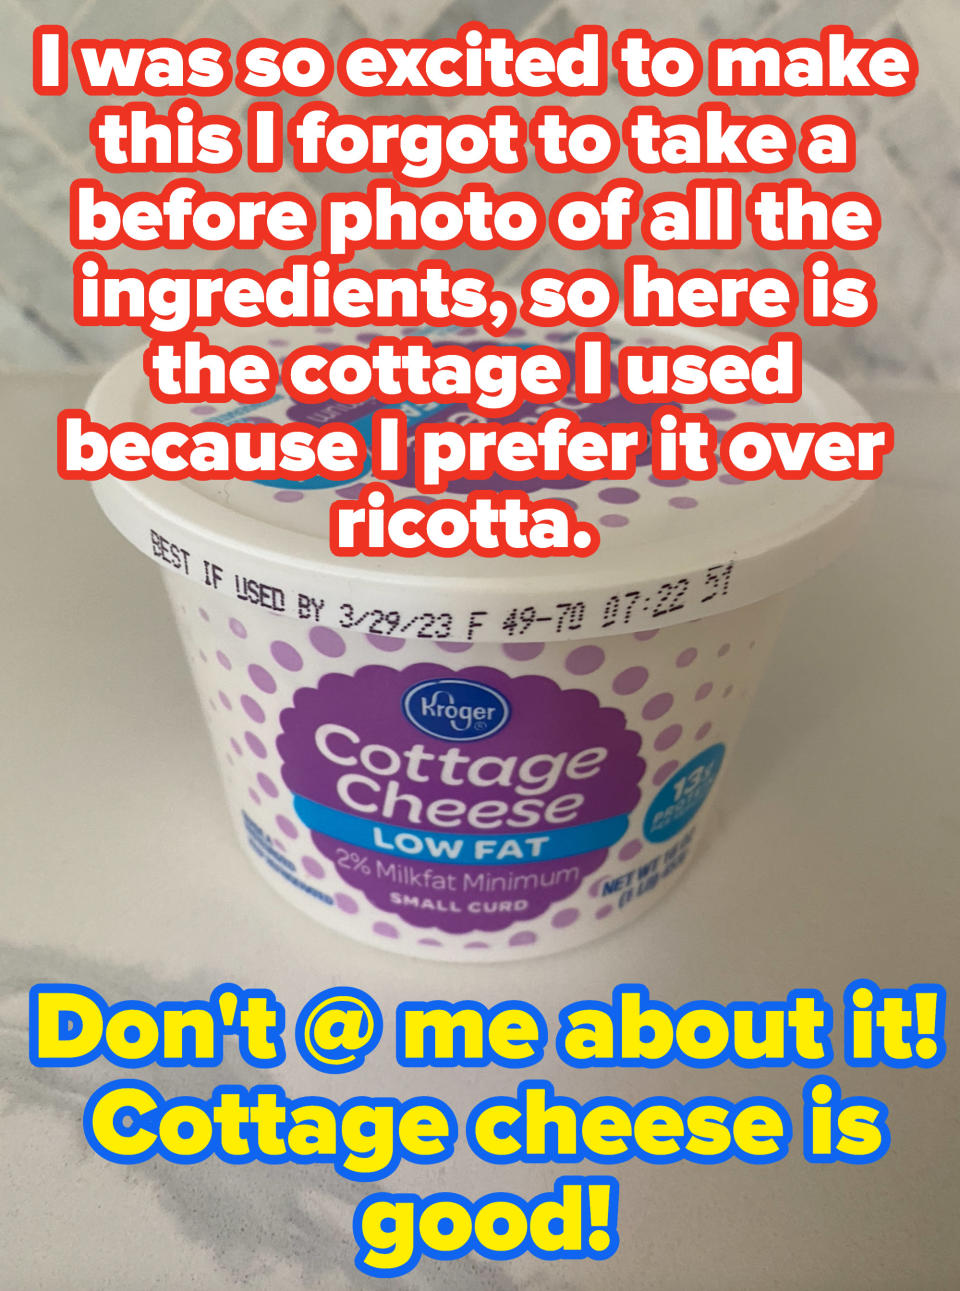 Cottage cheese sitting on the counter with the caption "I was so excited to make this I forgot to take a before photo of all the ingredients, so here is the cottage I used because I prefer it over ricotta"